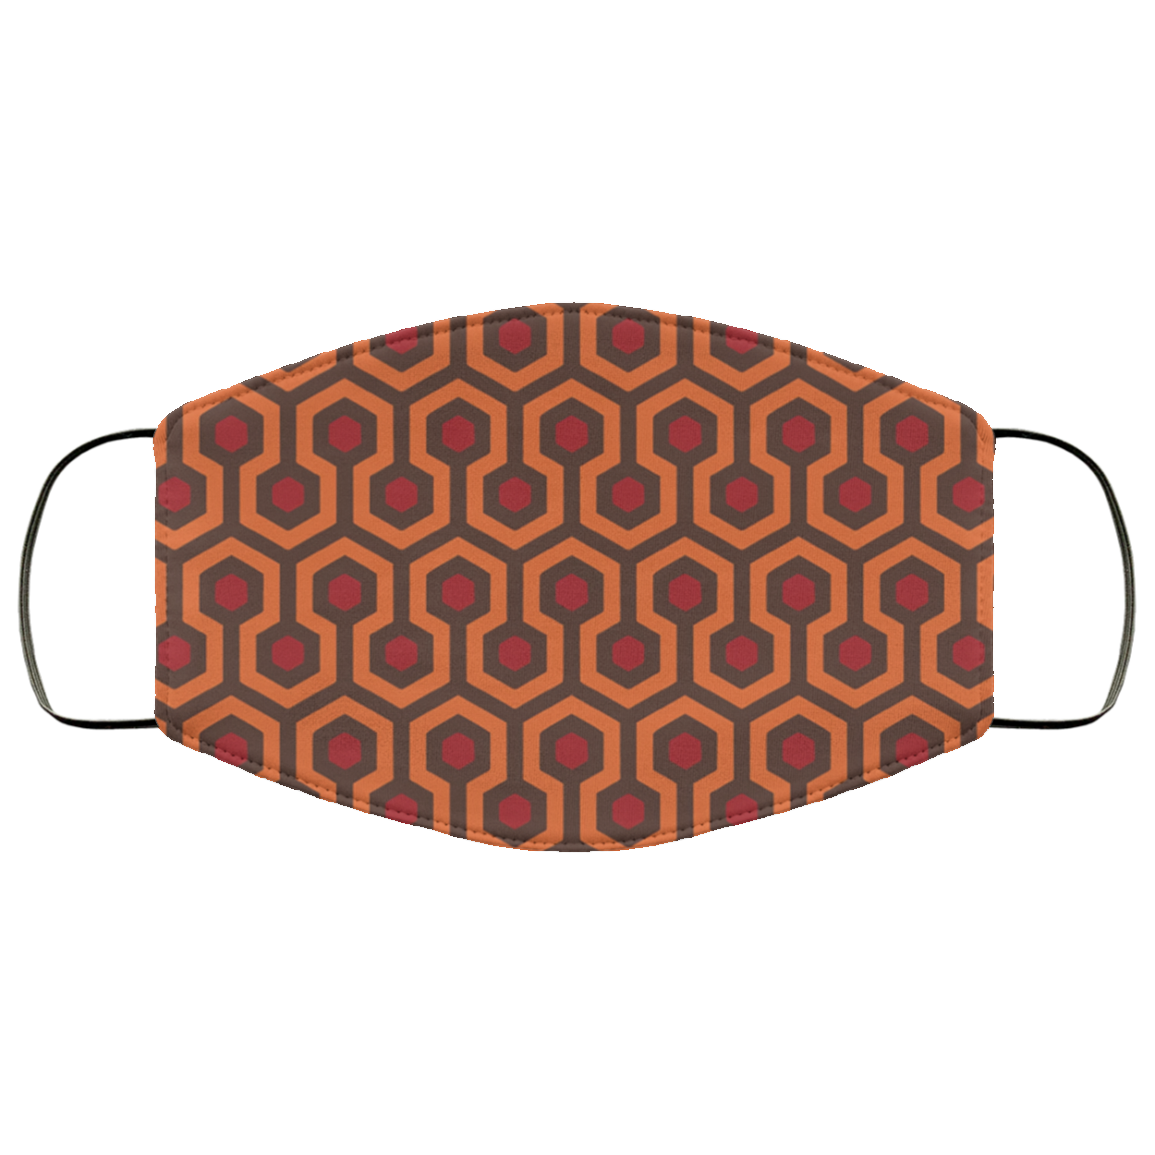 REDRUM Overlook Hotel Carpet Stephen King's The Shining Face Mask